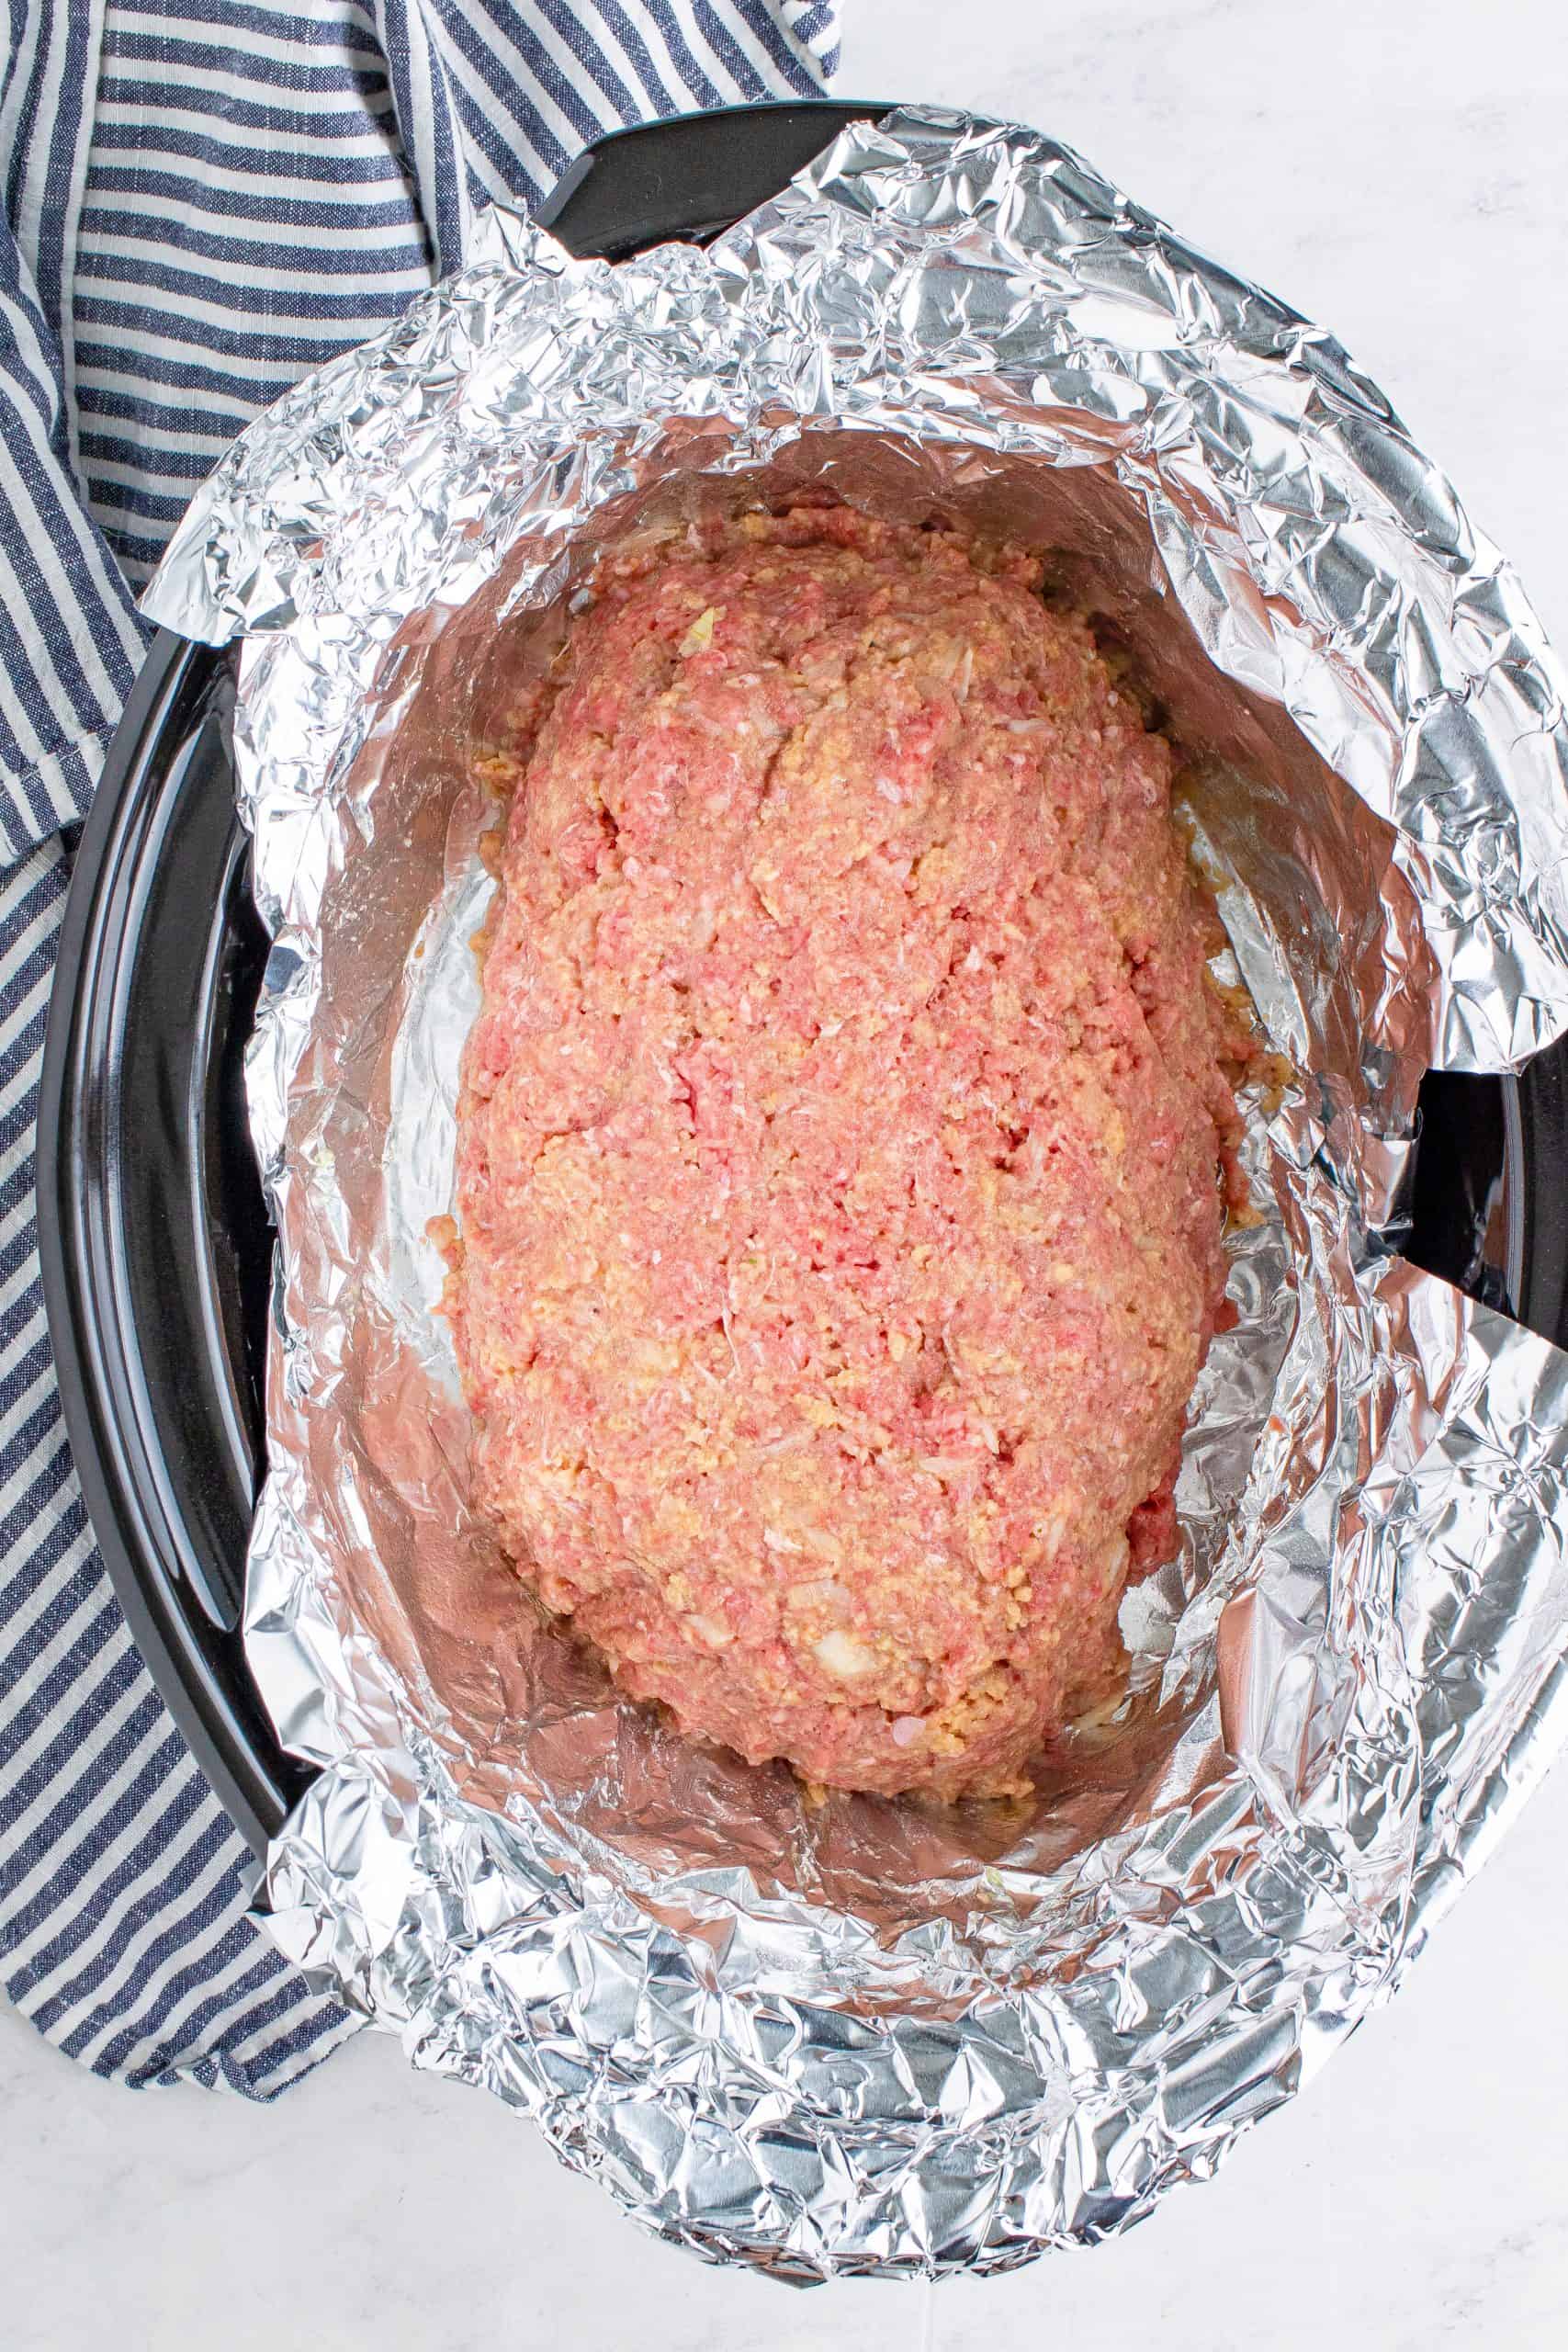 Ground beef shaped into a loaf in a foil lined crock pot